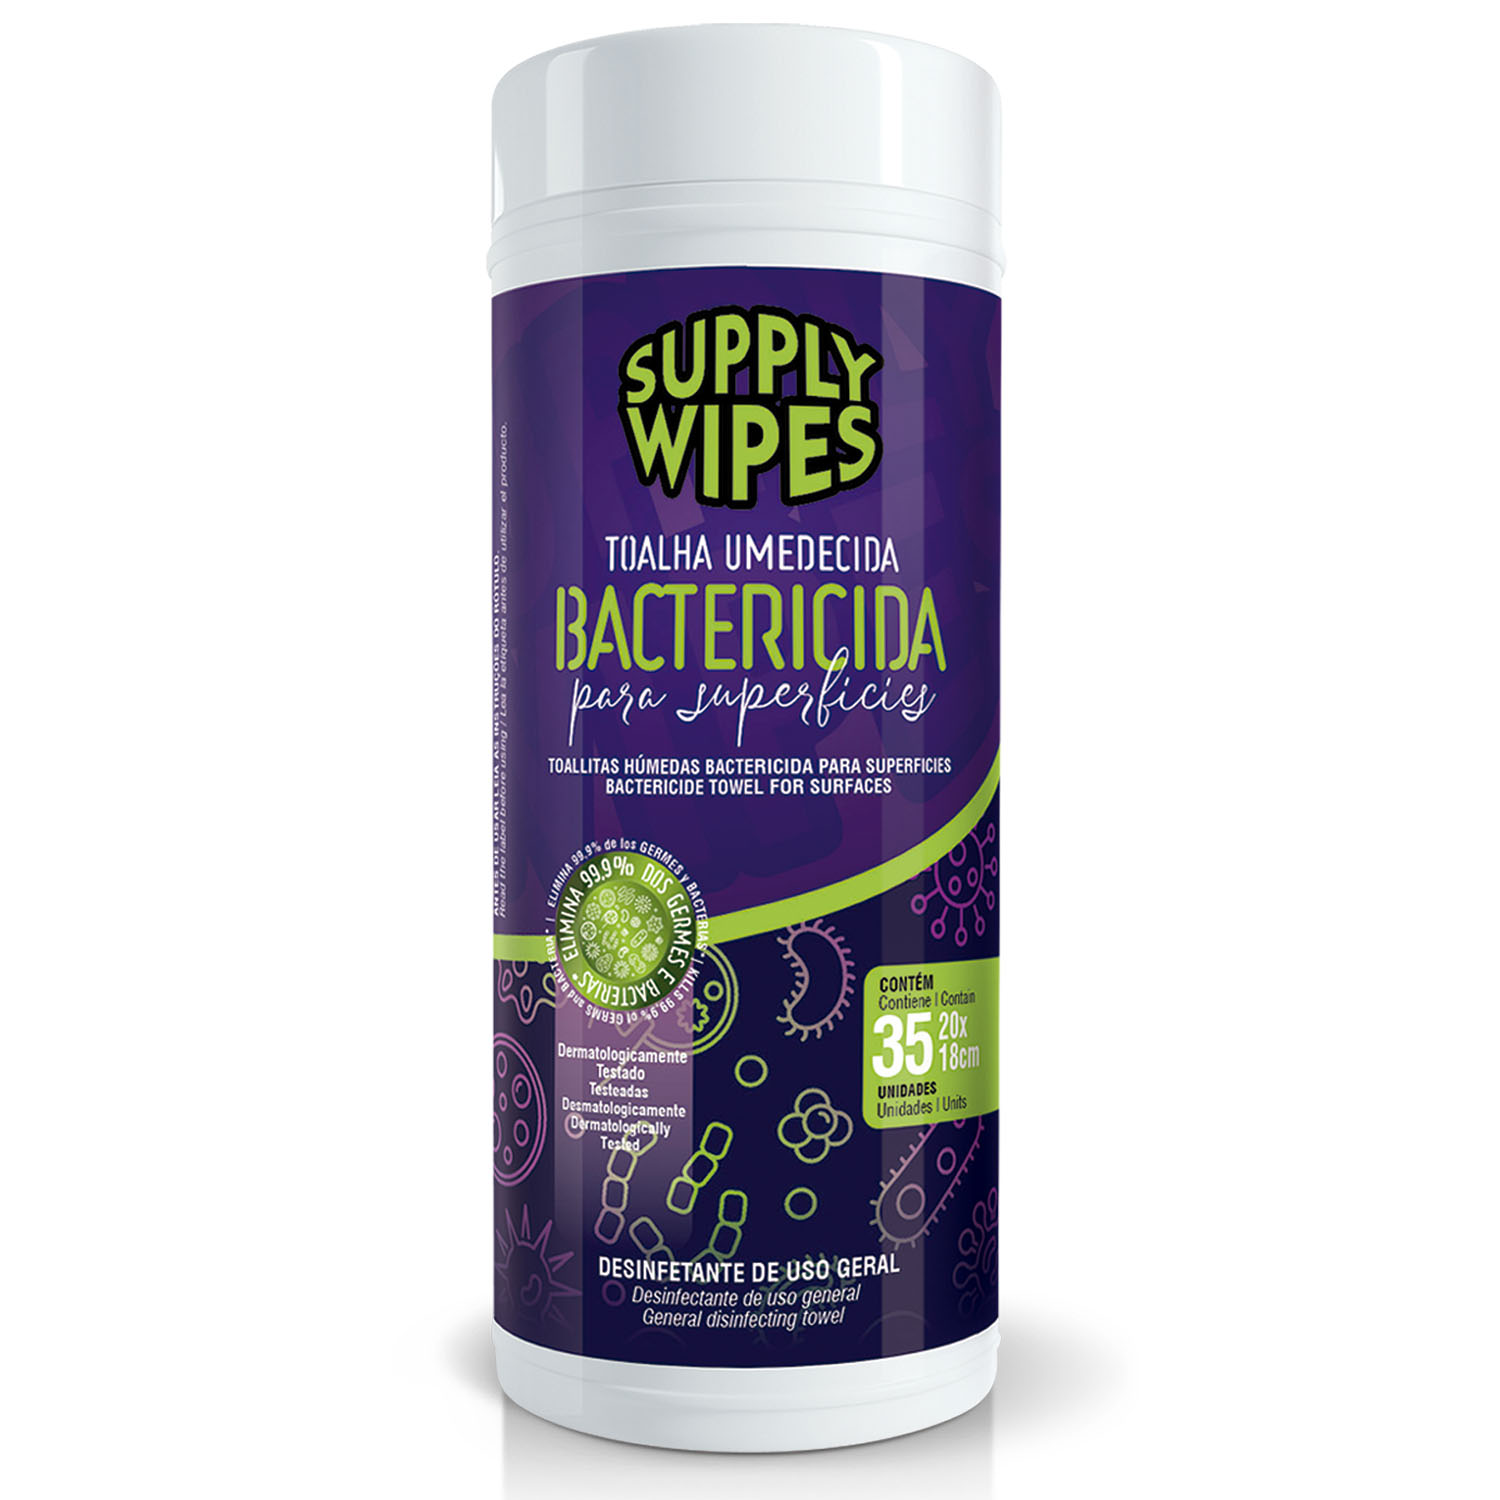 7898963035145 - PANOS UMED SUPPLY WIPES 35NID BACTERICIDA POTE